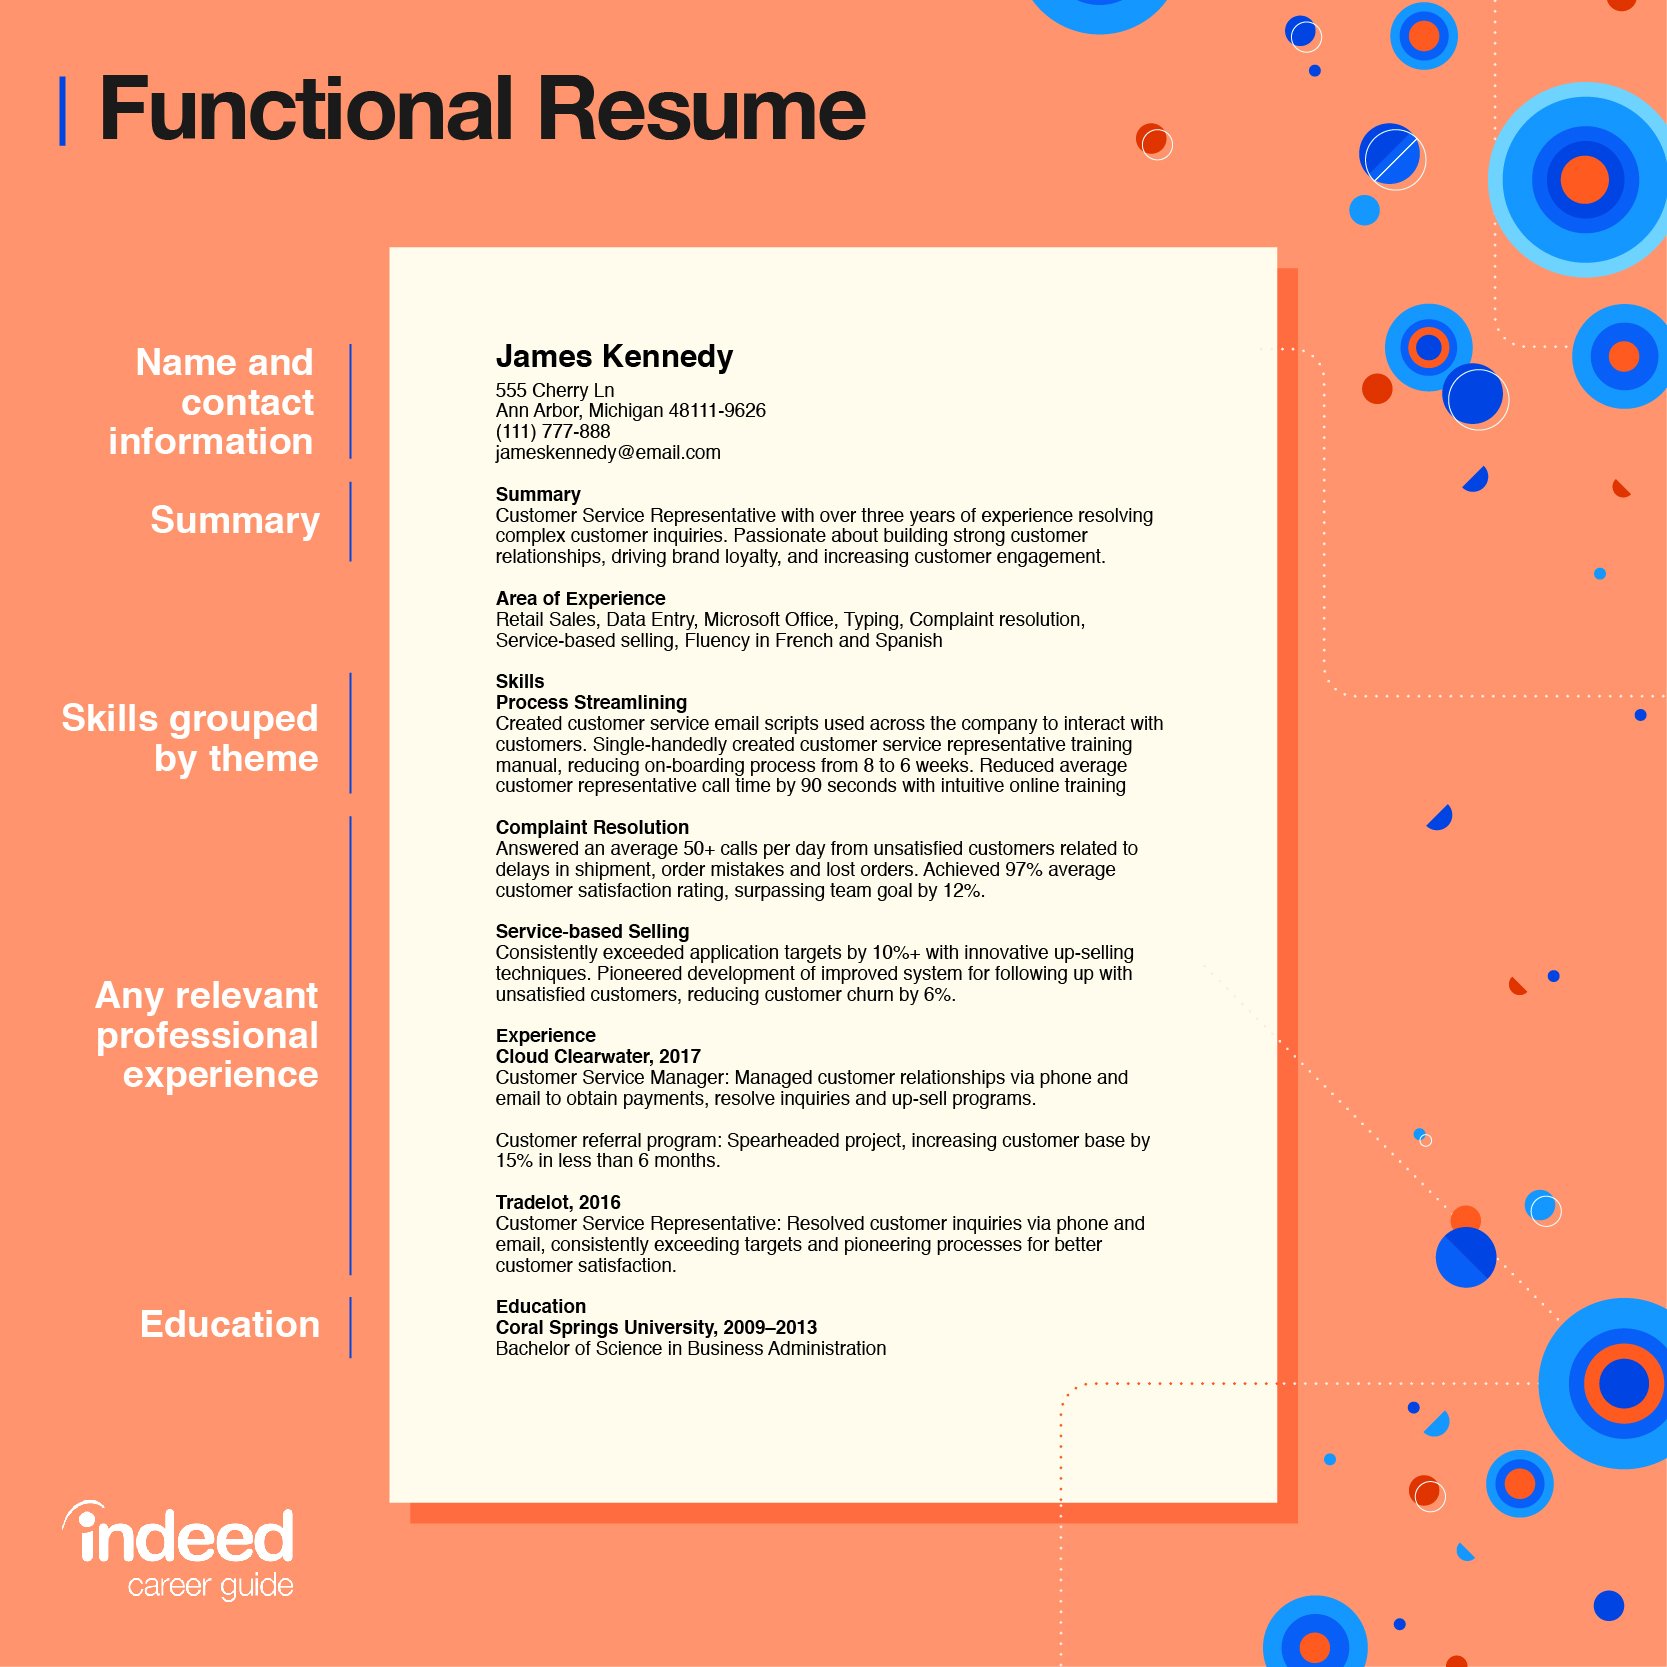 10 Best Skills to Include on a Resume (With Examples)